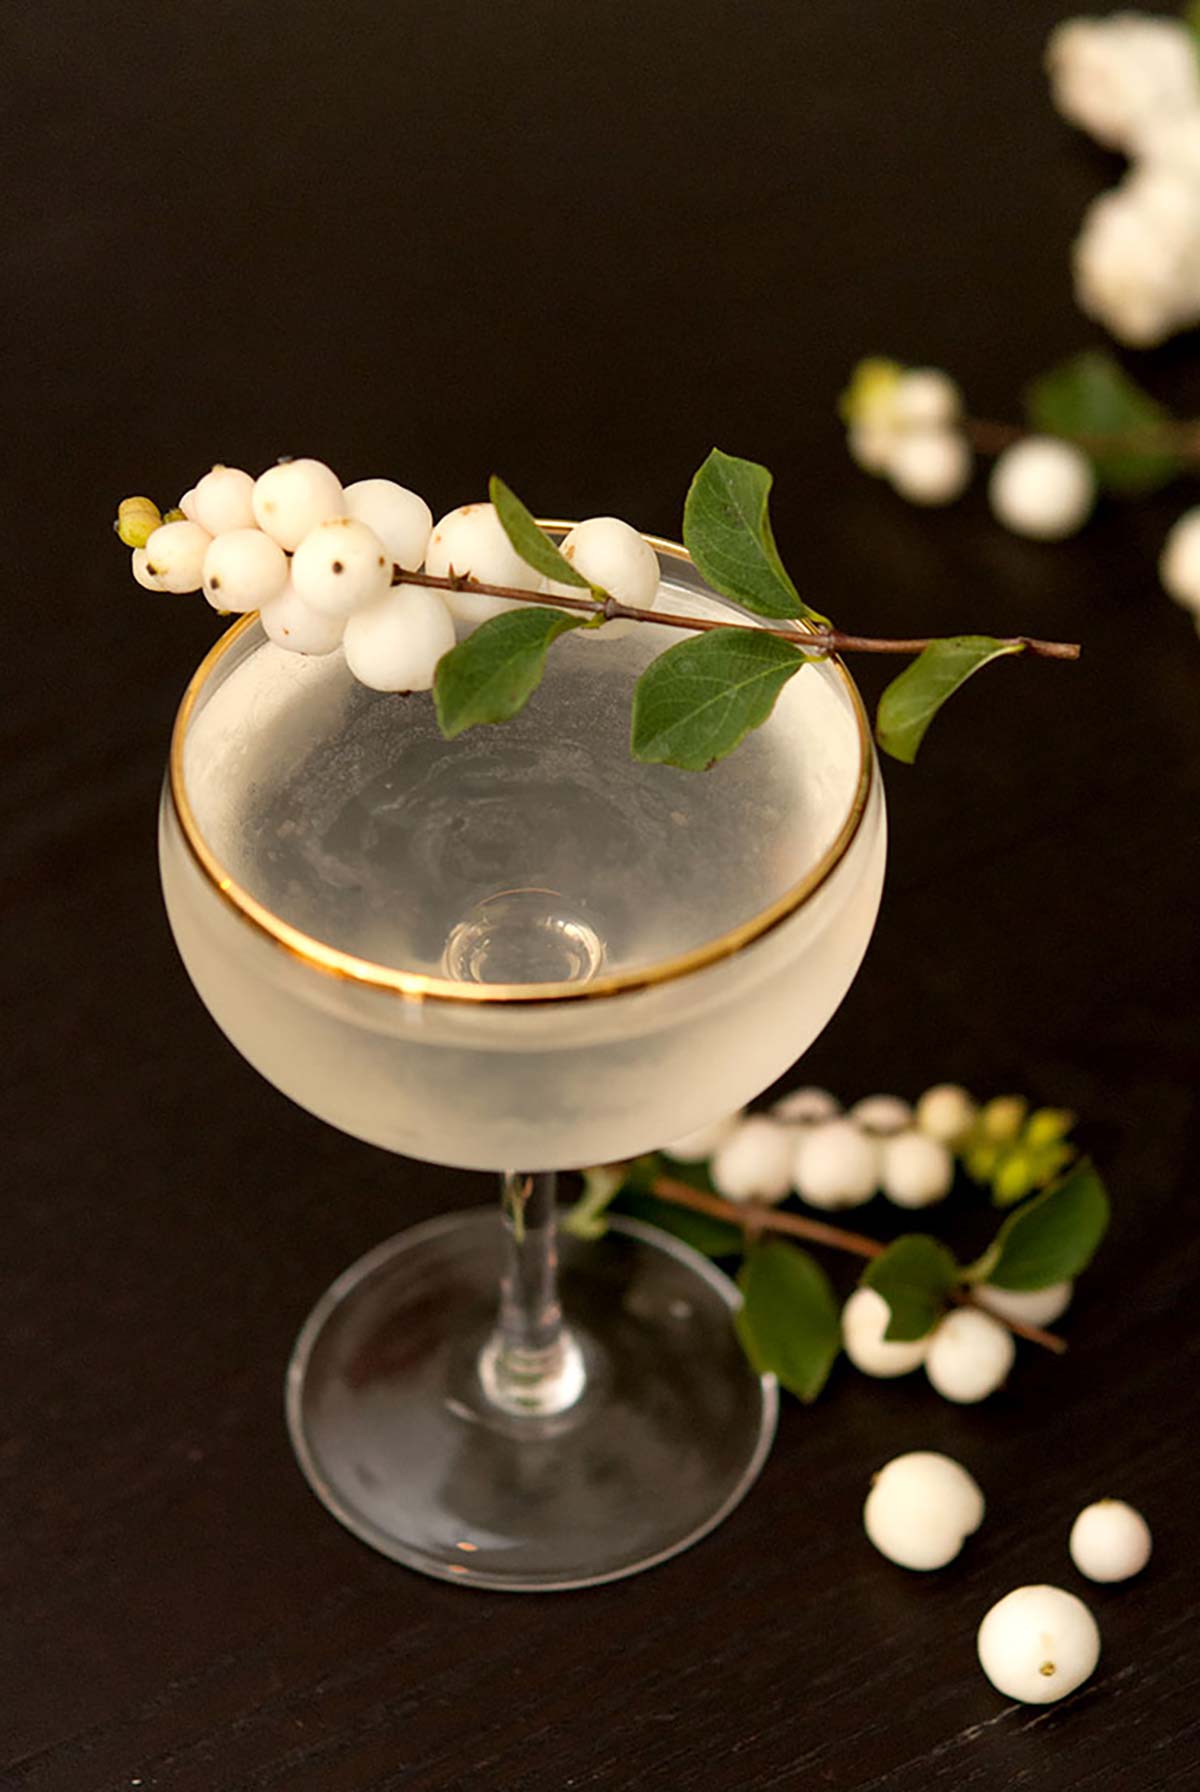 A clear cocktail in a gold-rimmed glass, garnished with white ghost berries on a black table, sprinkled with a few loose ghost berries.